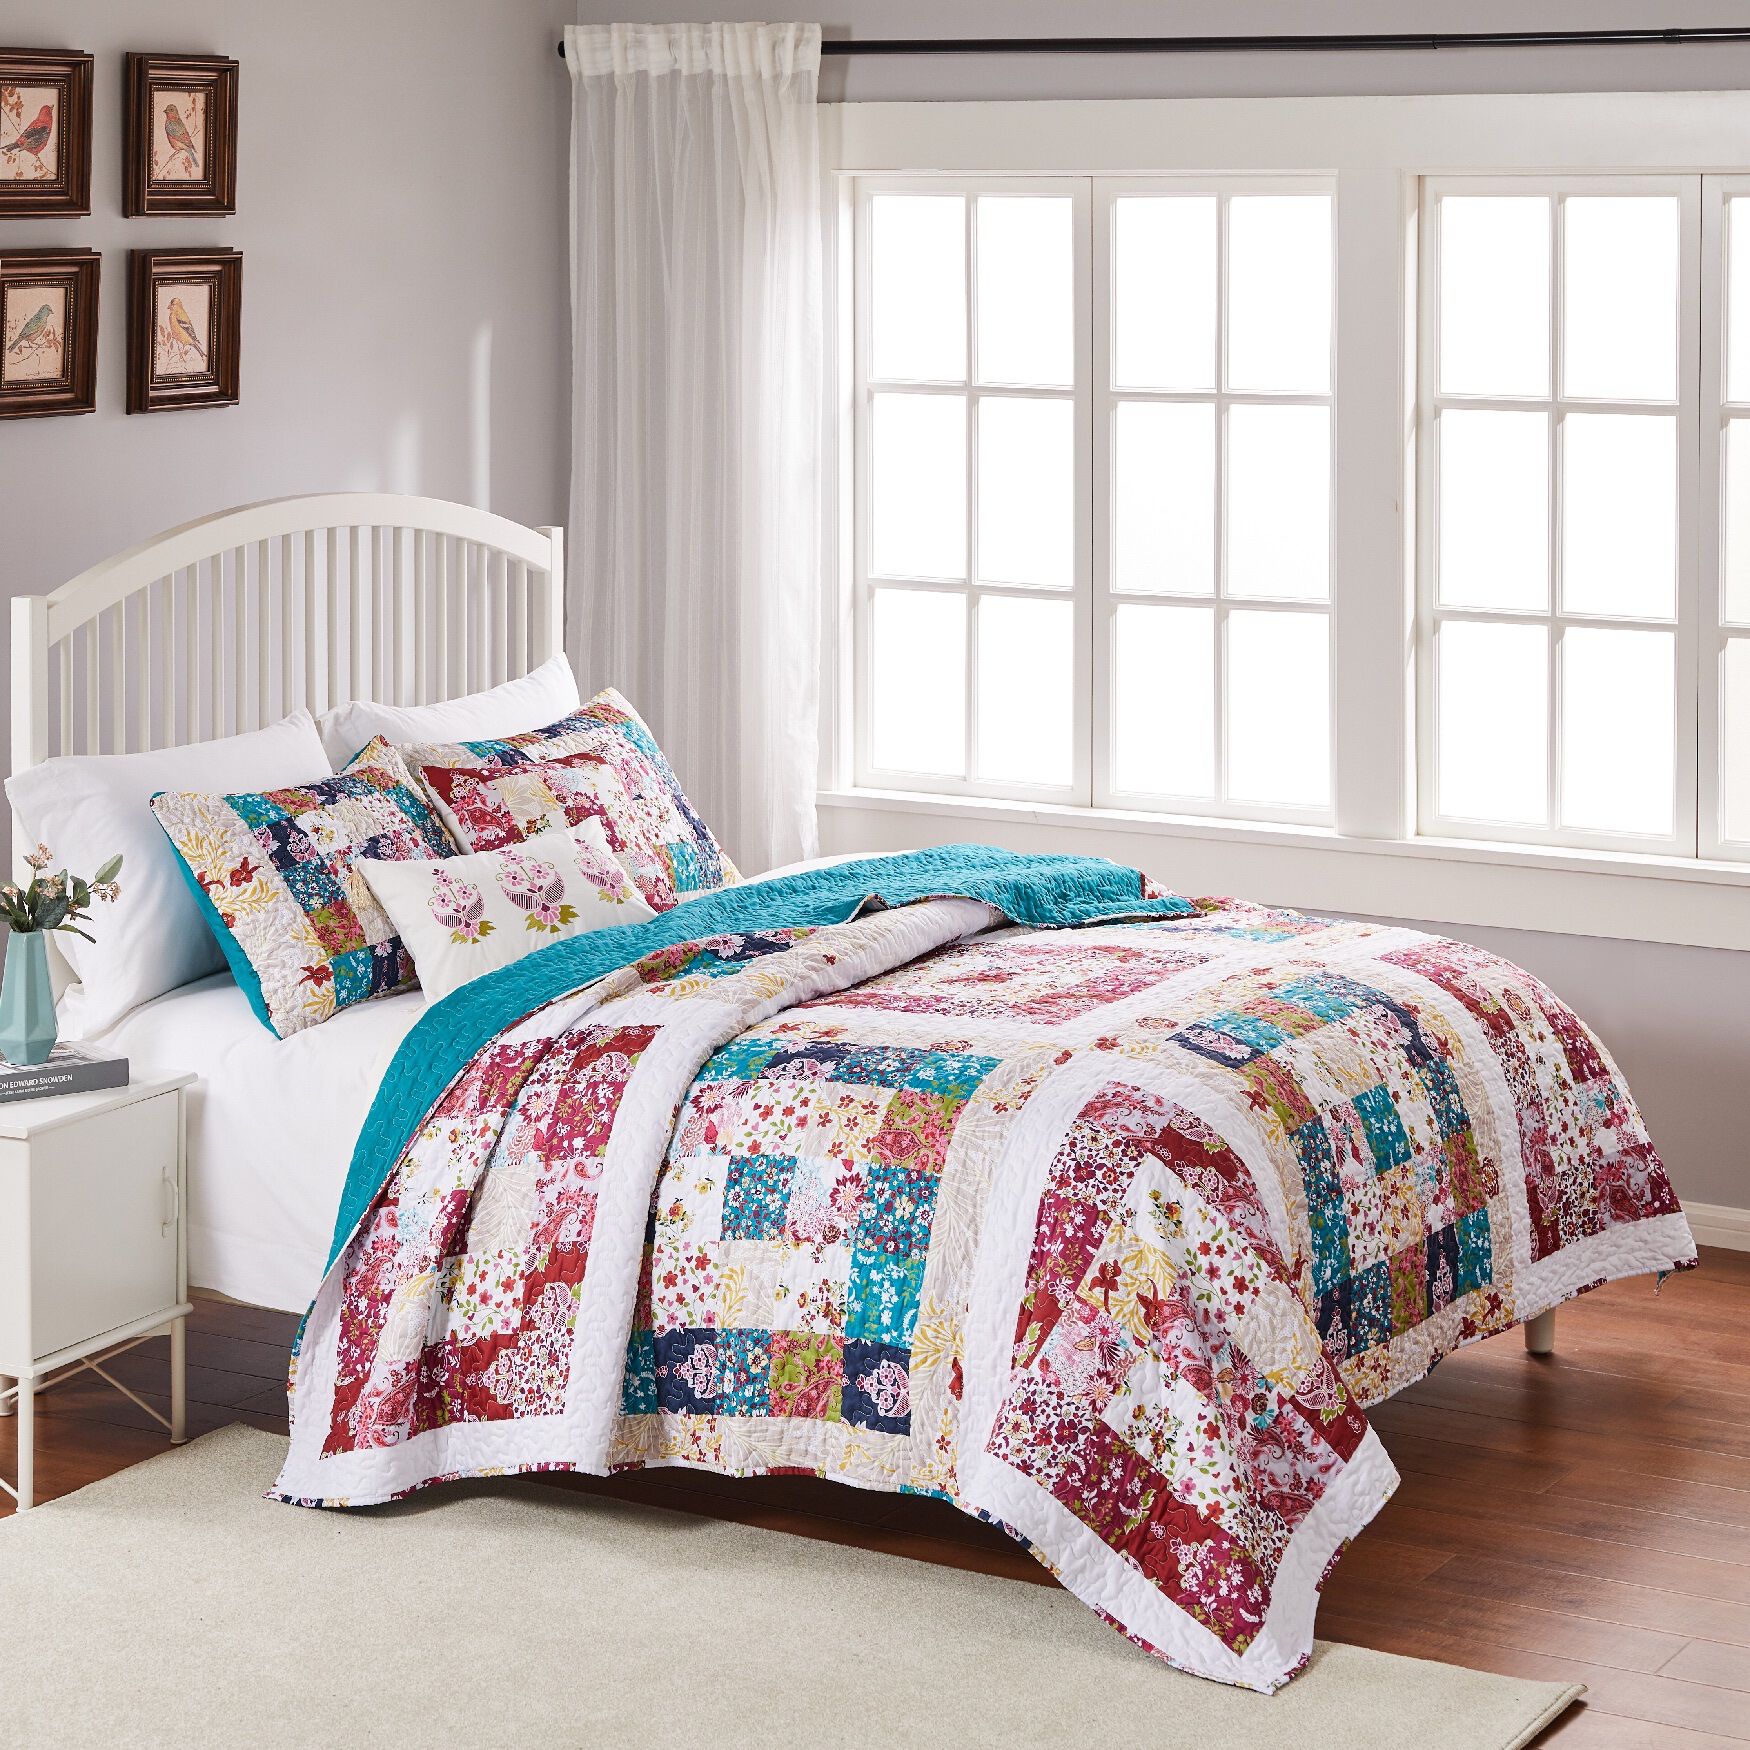 Harmony Quilt And Pillow Sham Set | Brylane Home